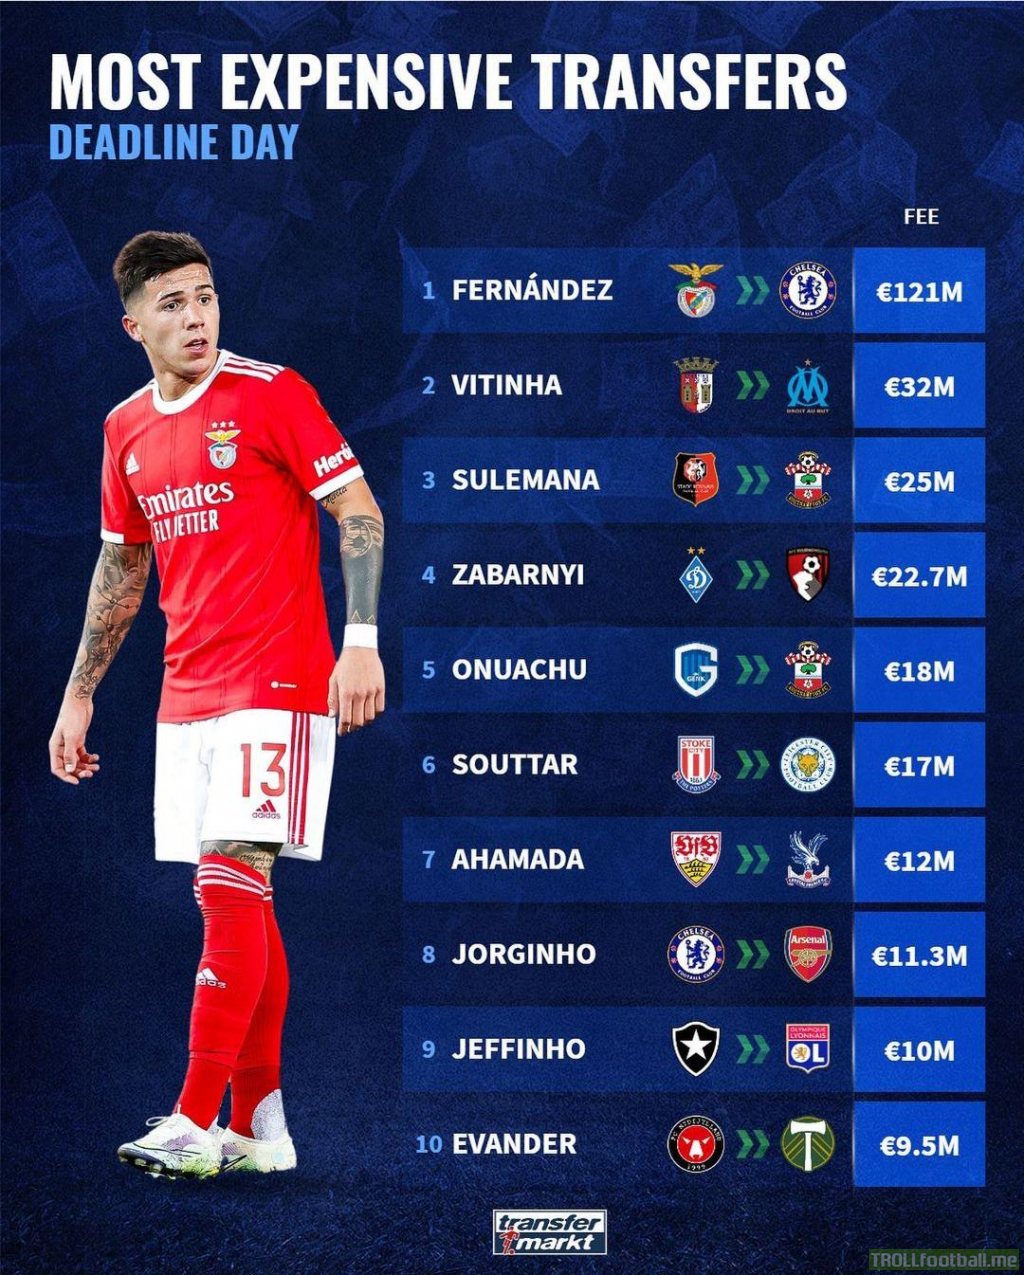 Most expensive transfers on deadline day